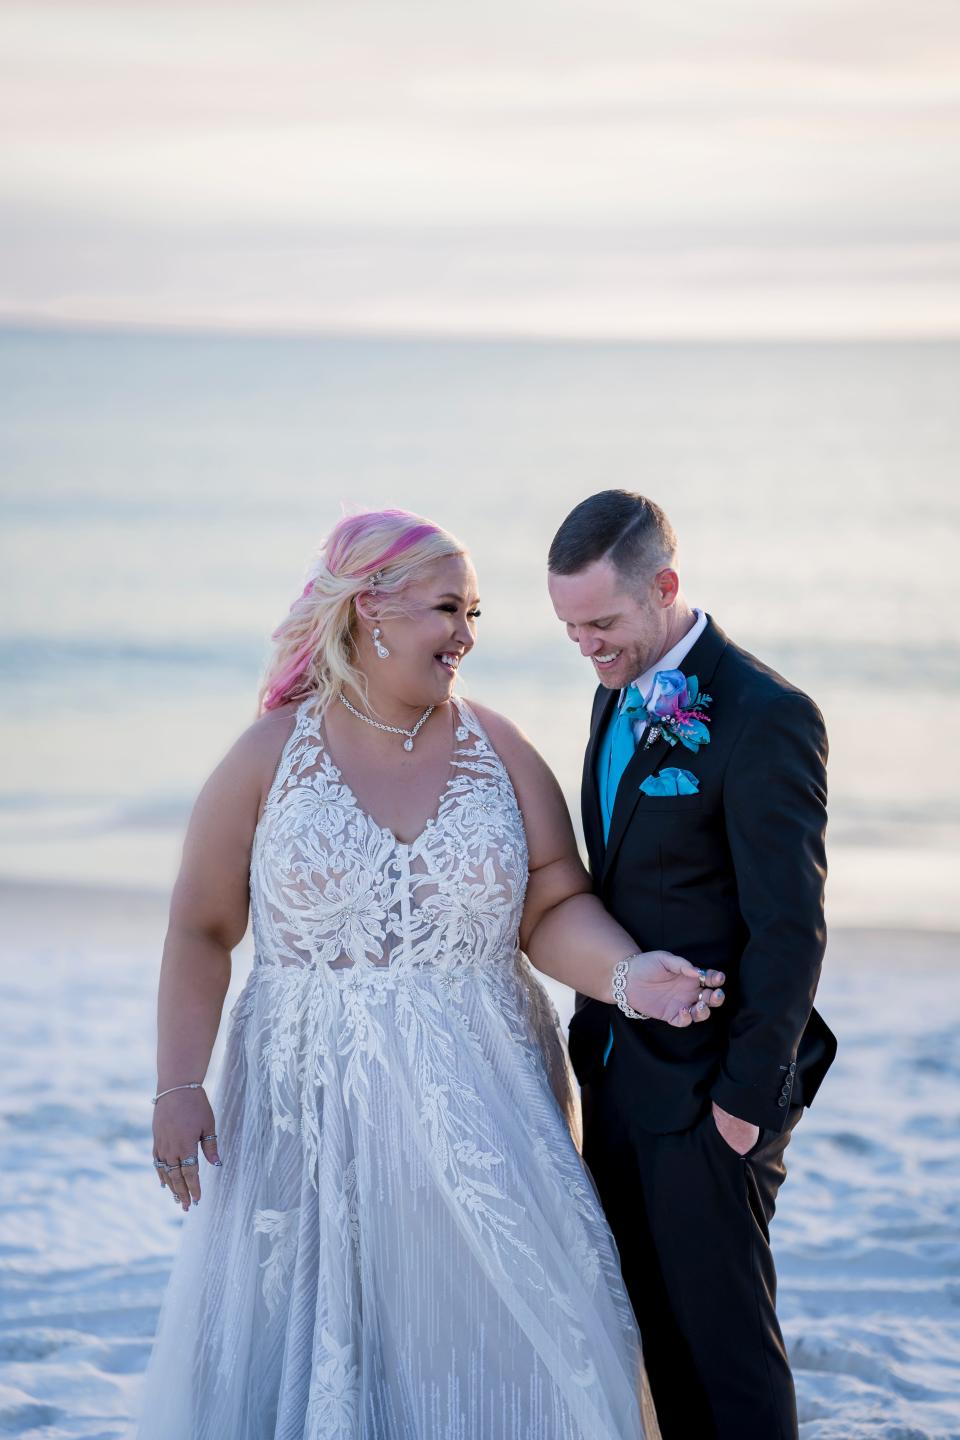 Mama June and husband Justin Stroud marry in 'intimate' ceremony with